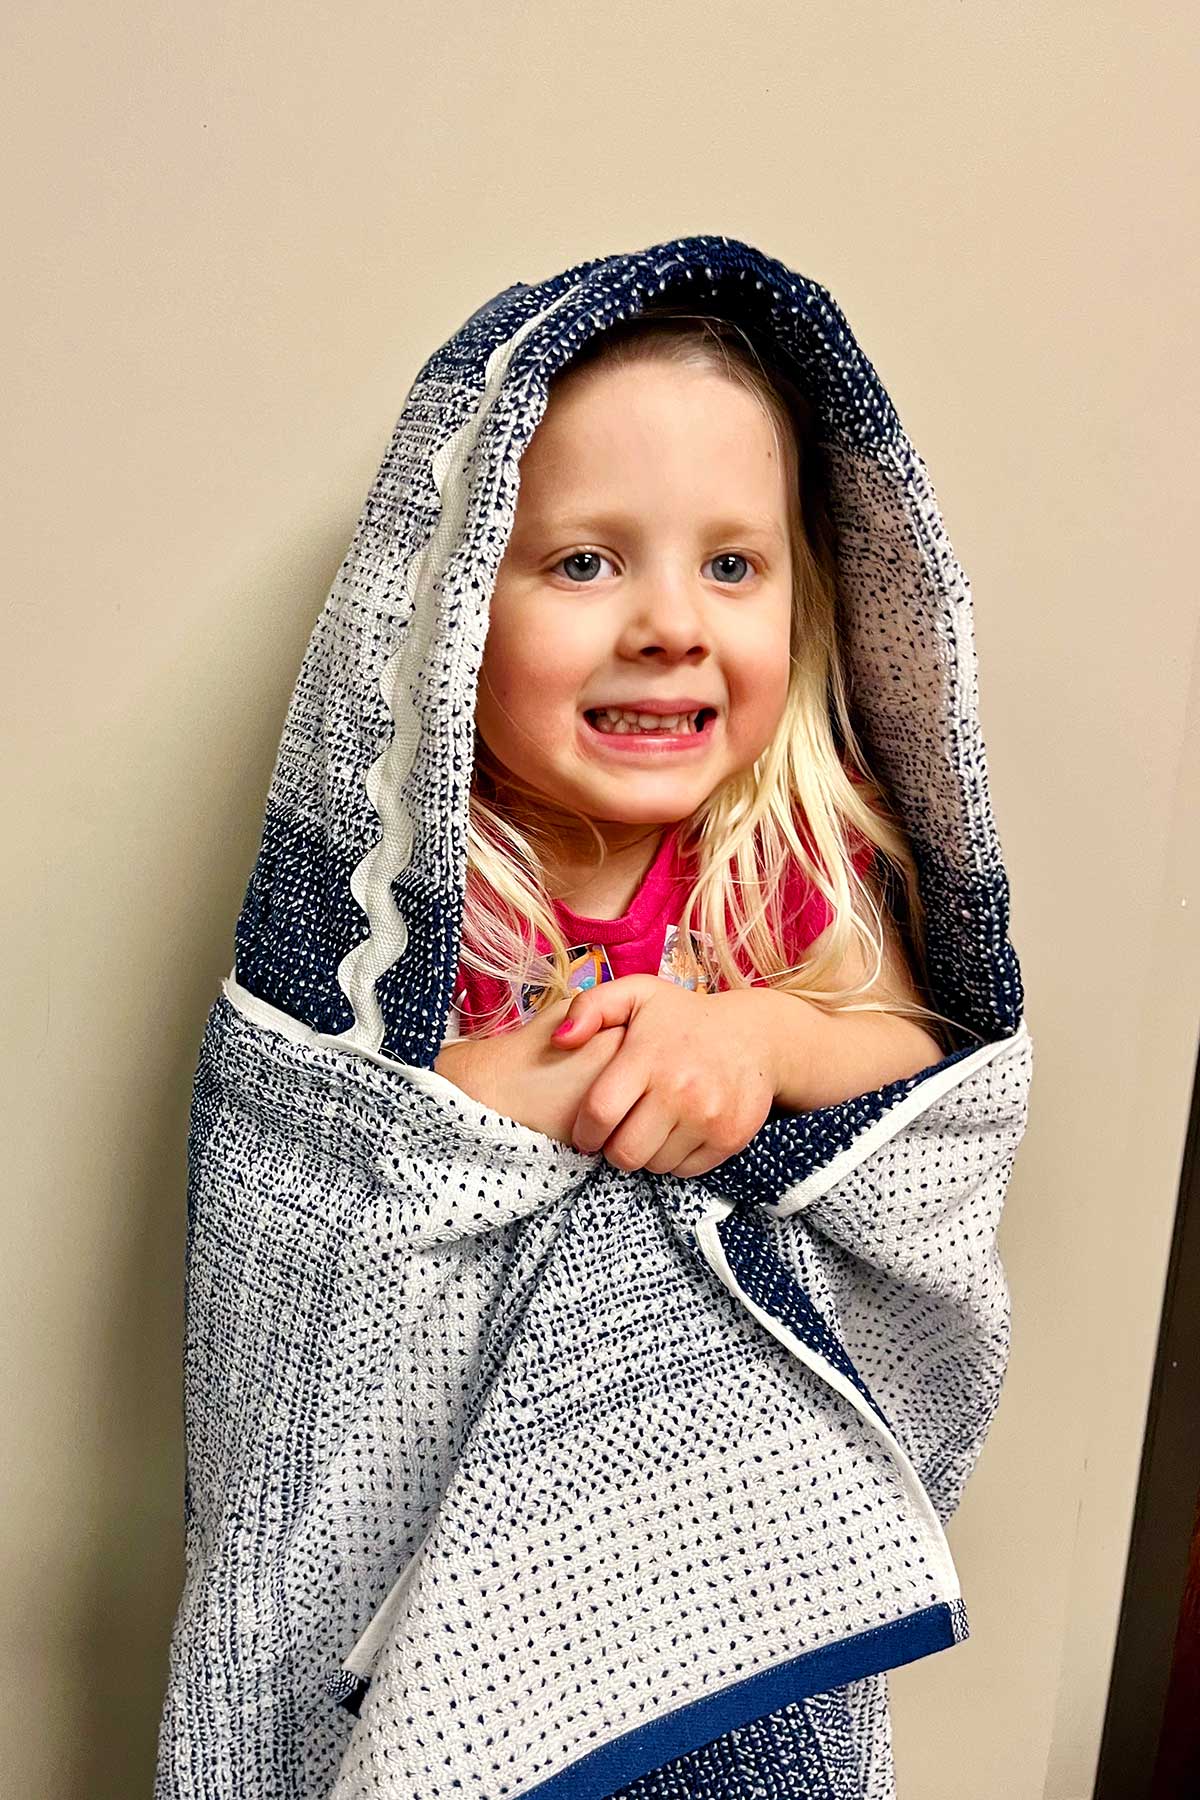 Young girl with blonde hair snuggled up in a hooded blue and white towel smiling.